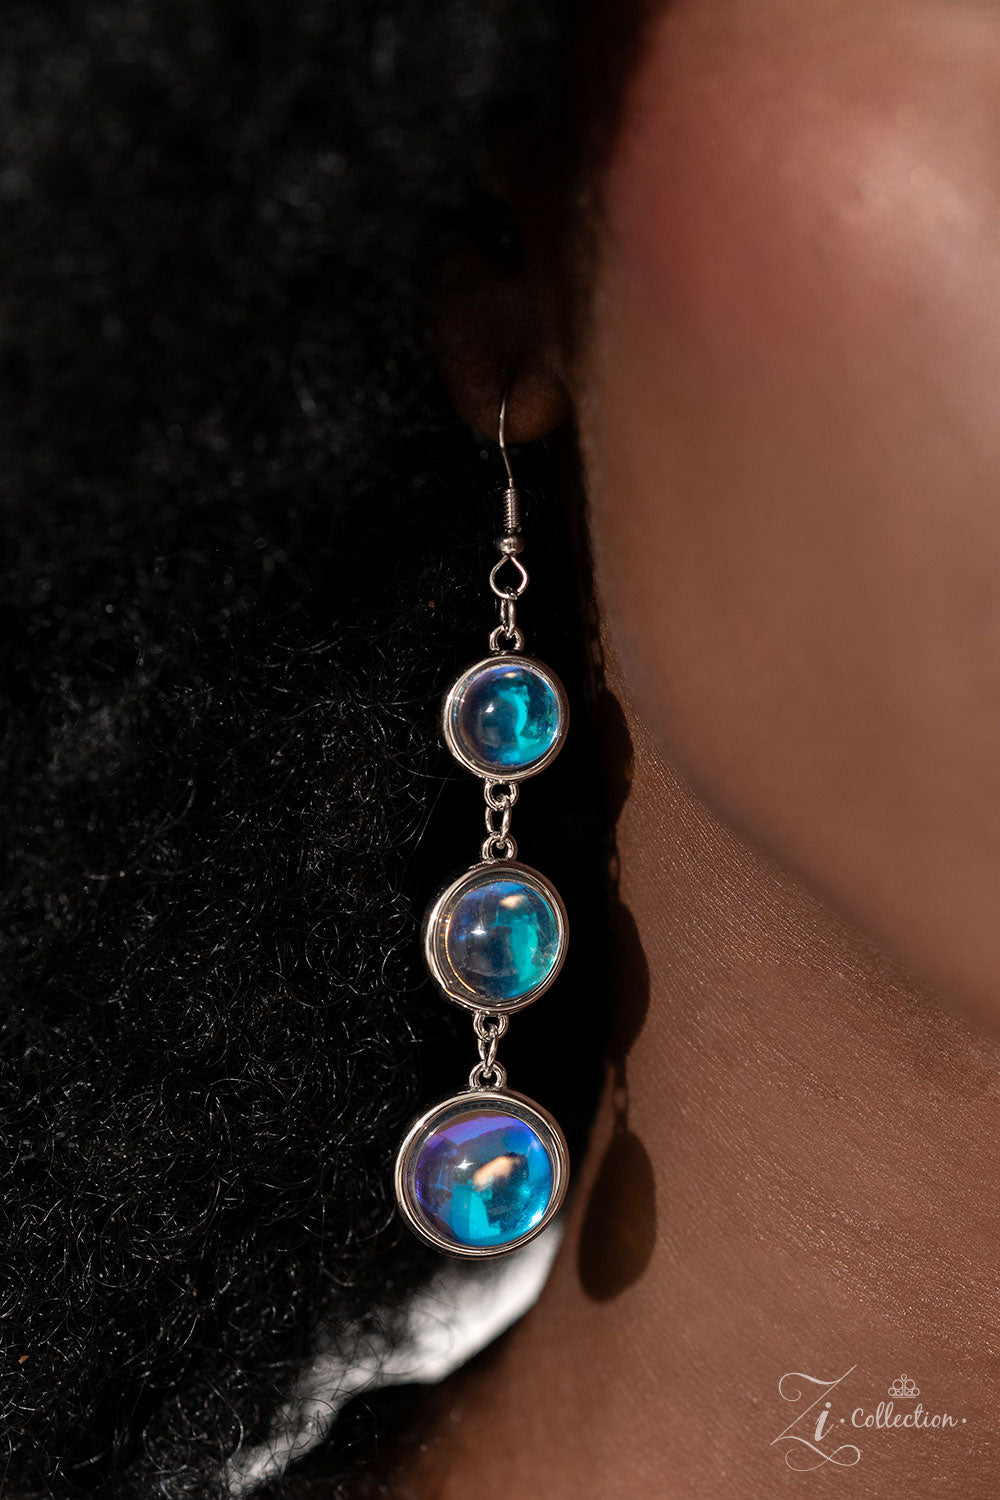 A dizzying display of silver hoops drapes across the chest in effervescent layers. Smooth, glassy beads, brushed in swirls of pastel iridescence, bubble up from some of the open, circular frames, further exaggerating their staggered size and placement, and showcasing their dreamy opalescent finish. With every new angle, a different hue emerges from the glassy beads, mimicking the reflective surface of water in a tropical paradise and emitting an air of serenity. Features an adjustable clasp closure.